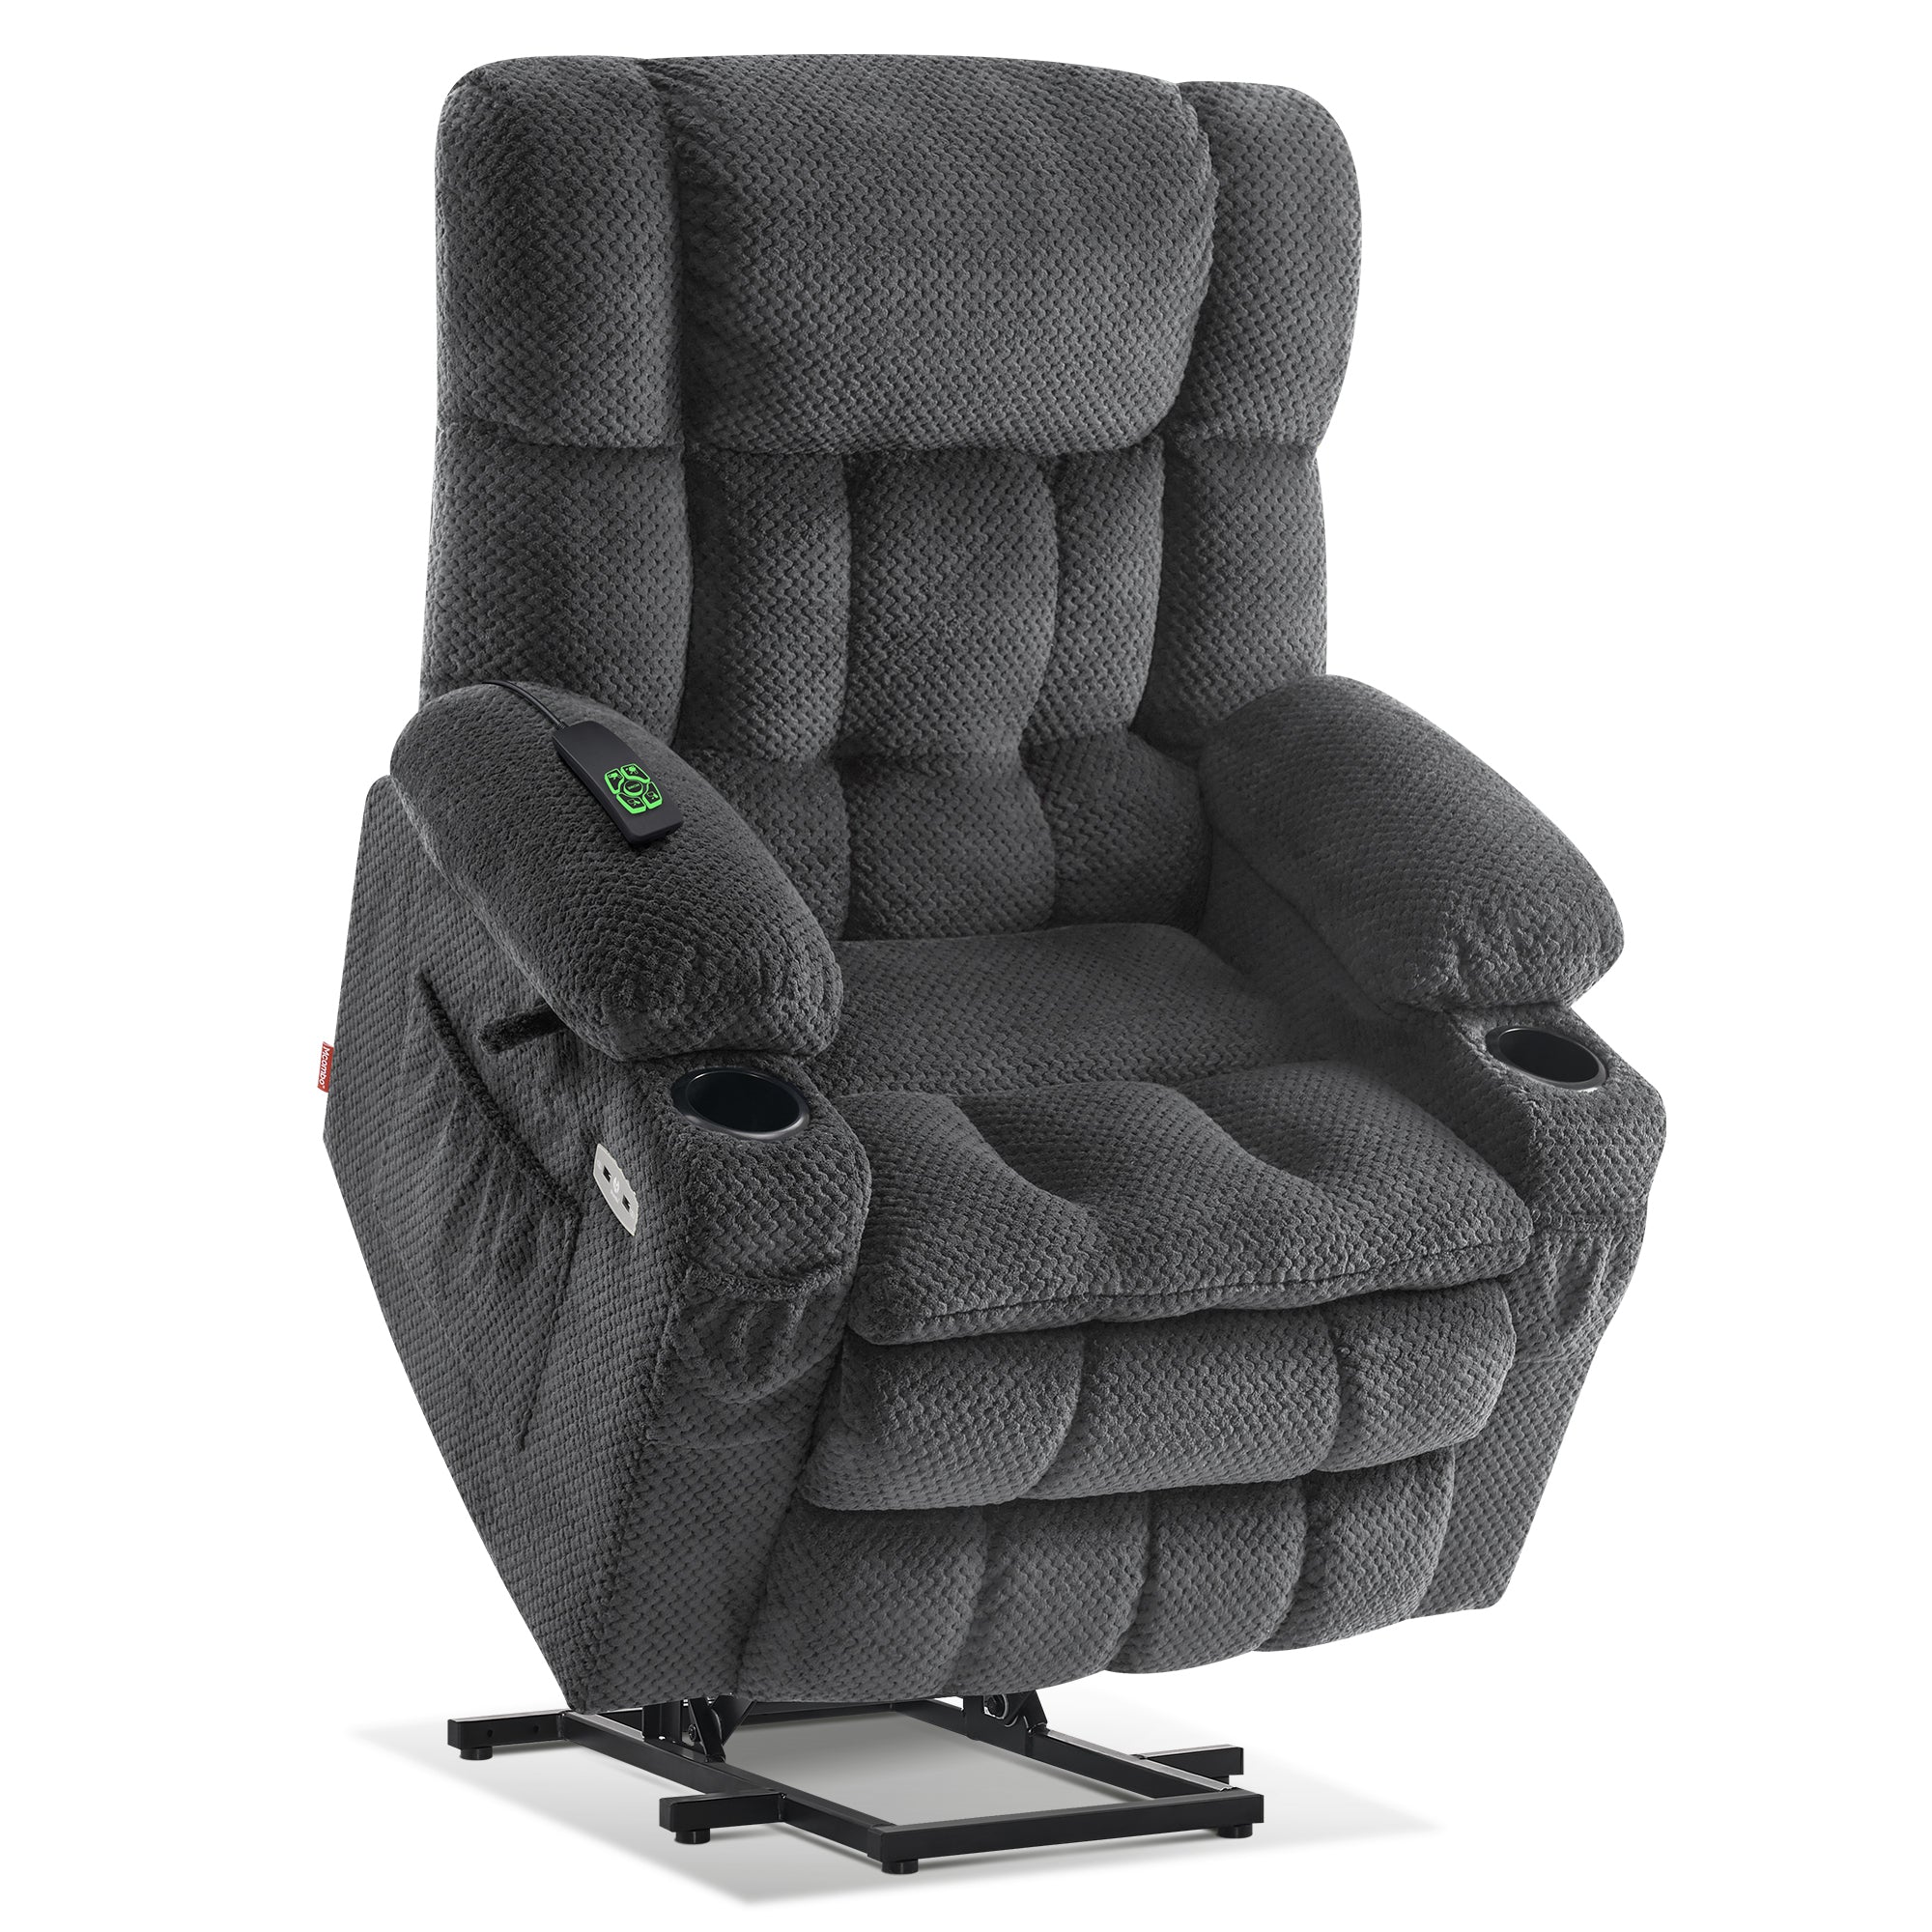 MCombo Dual Motor Power Lift Recliner Chair with Massage and Heat for Elderly People, Infinite Position, USB Ports, Cup Holders, Extended Footrest, Fabric, 7890 Series